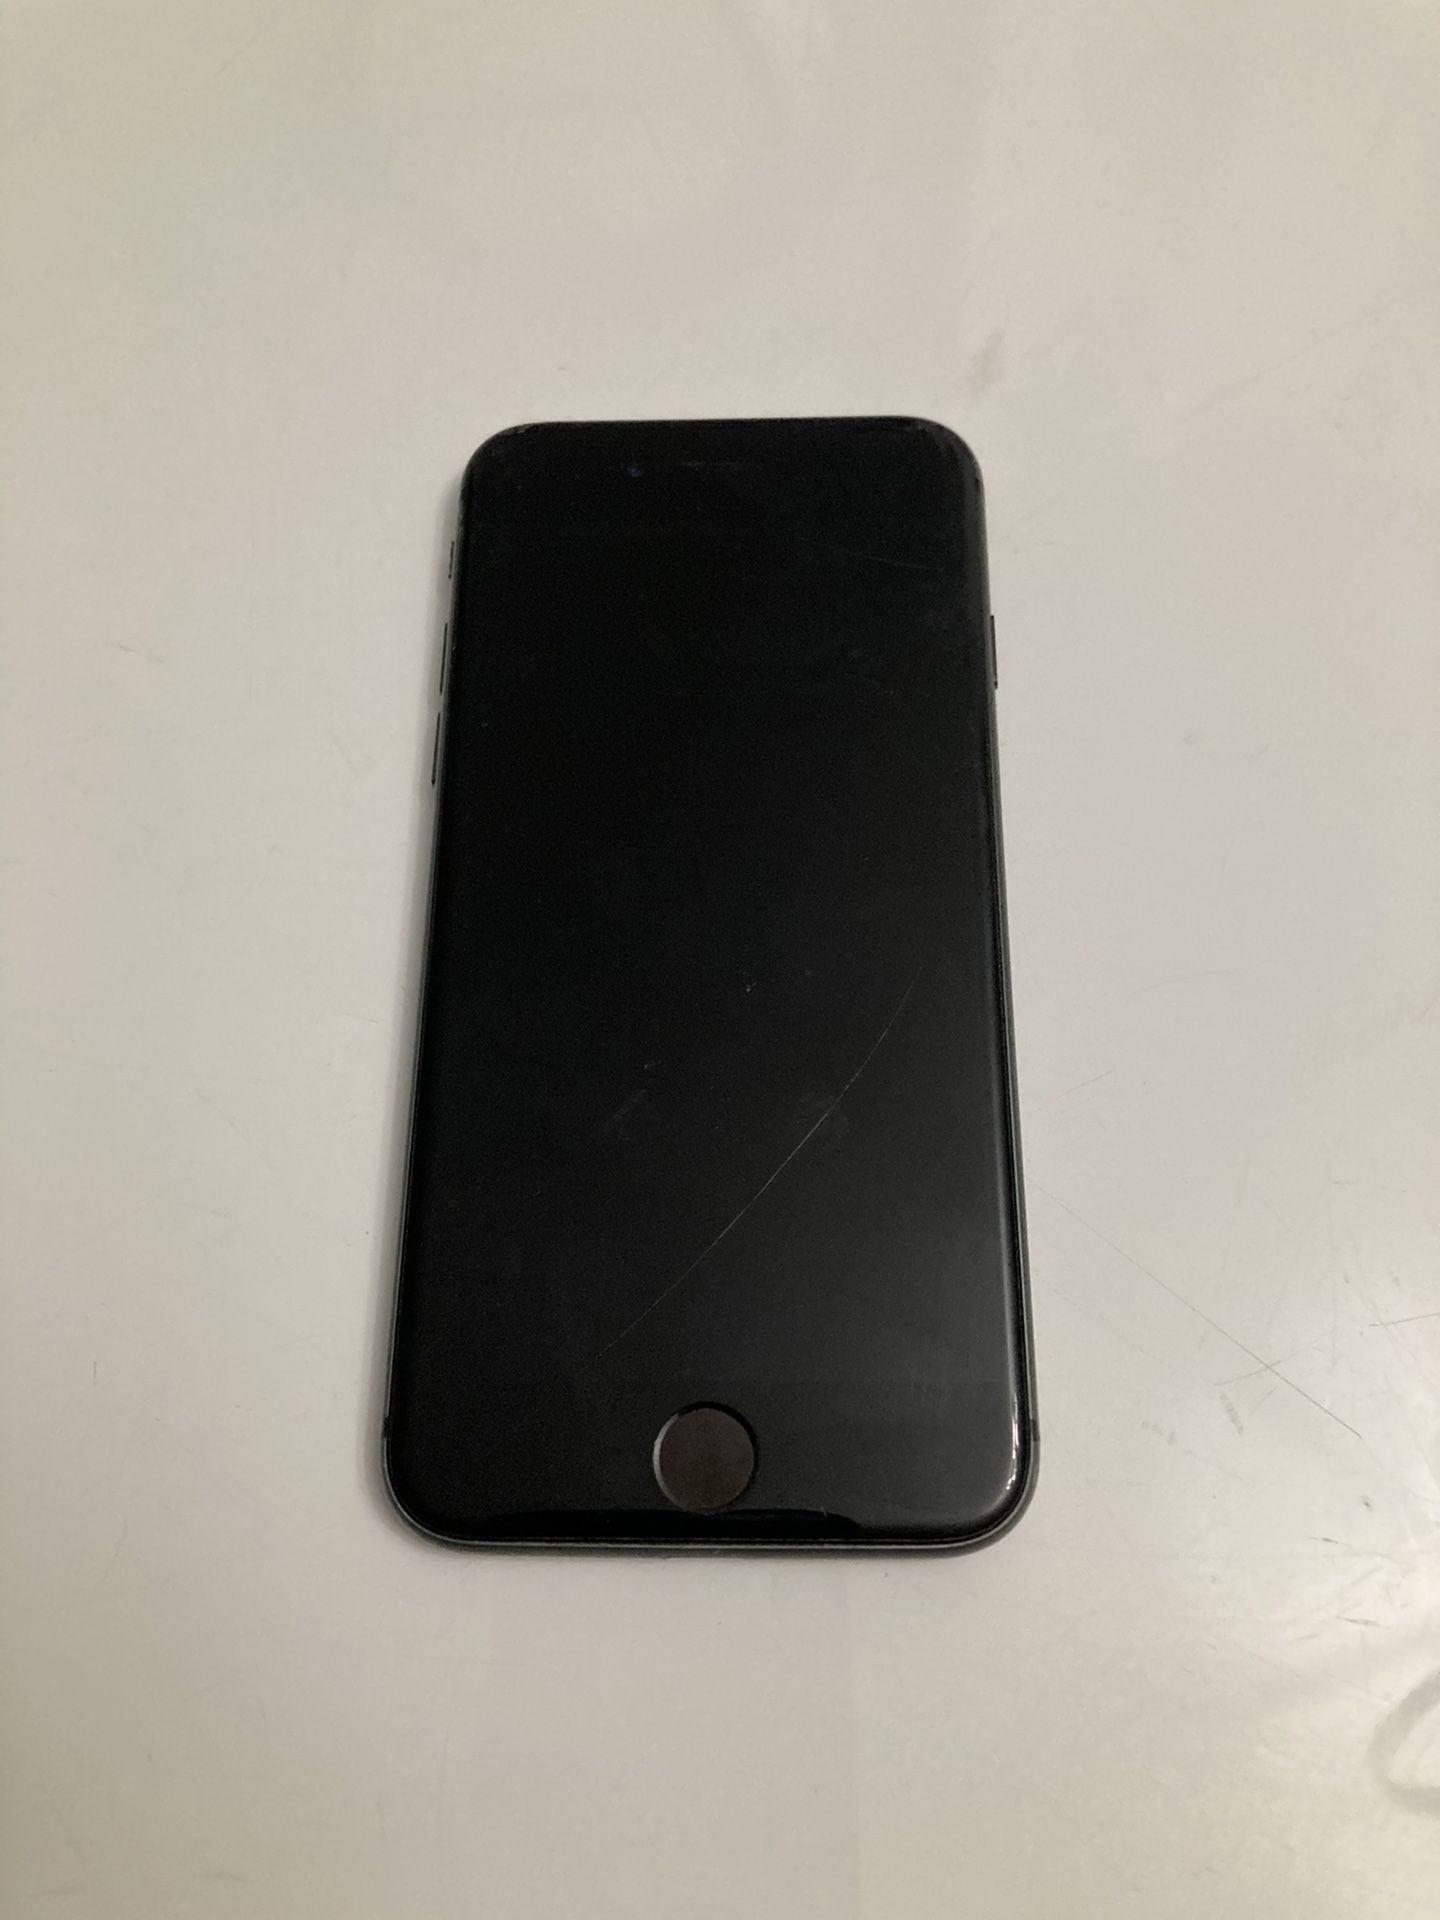 iPhone 8 NOT WORKING